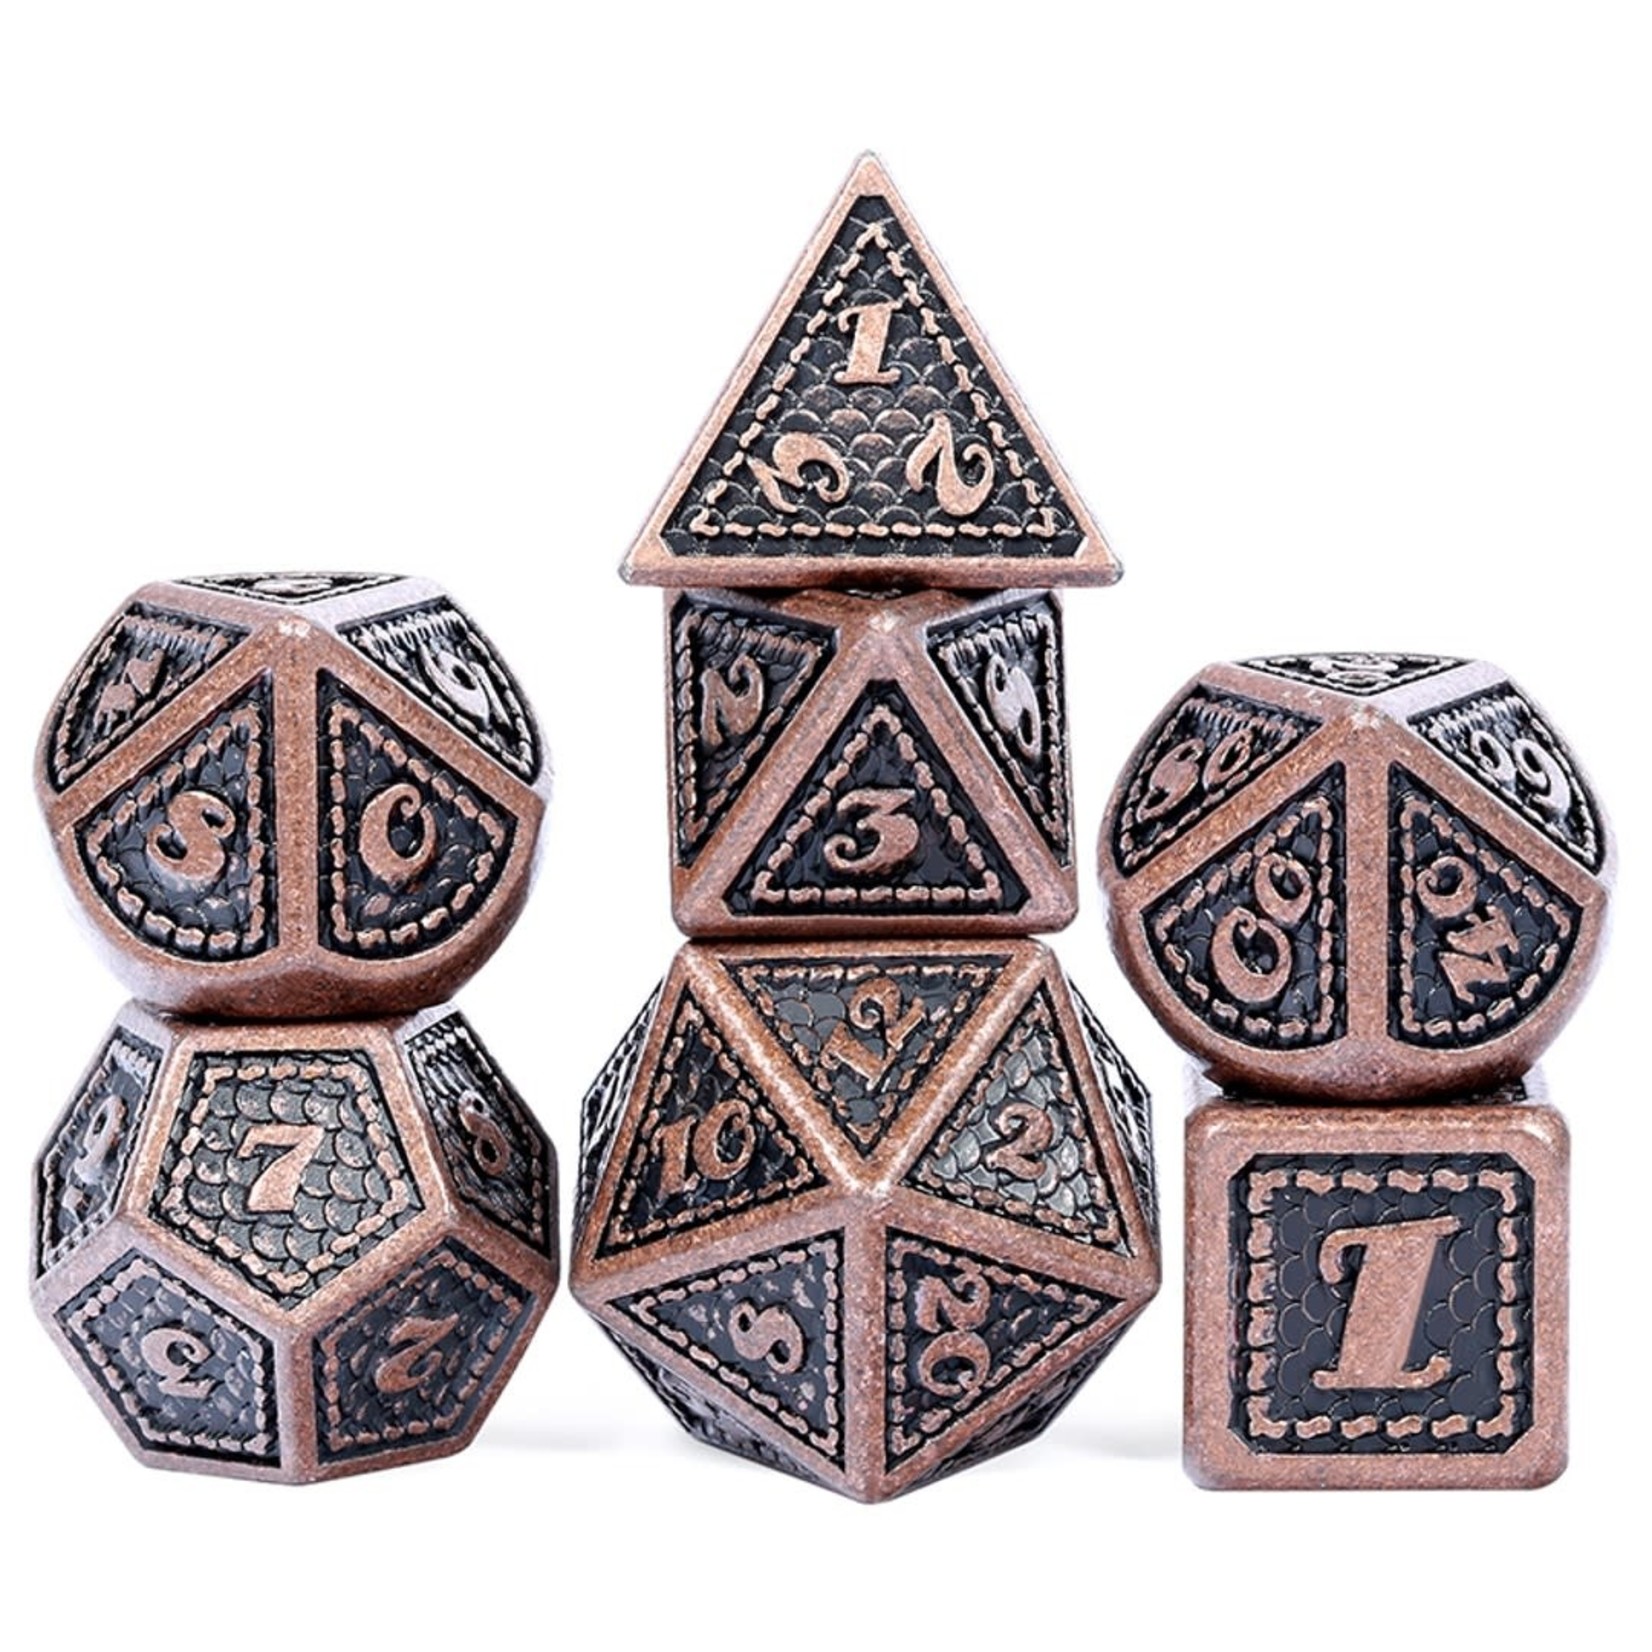 Dice Habit New World Black with Copper Polyhedral 7 die set